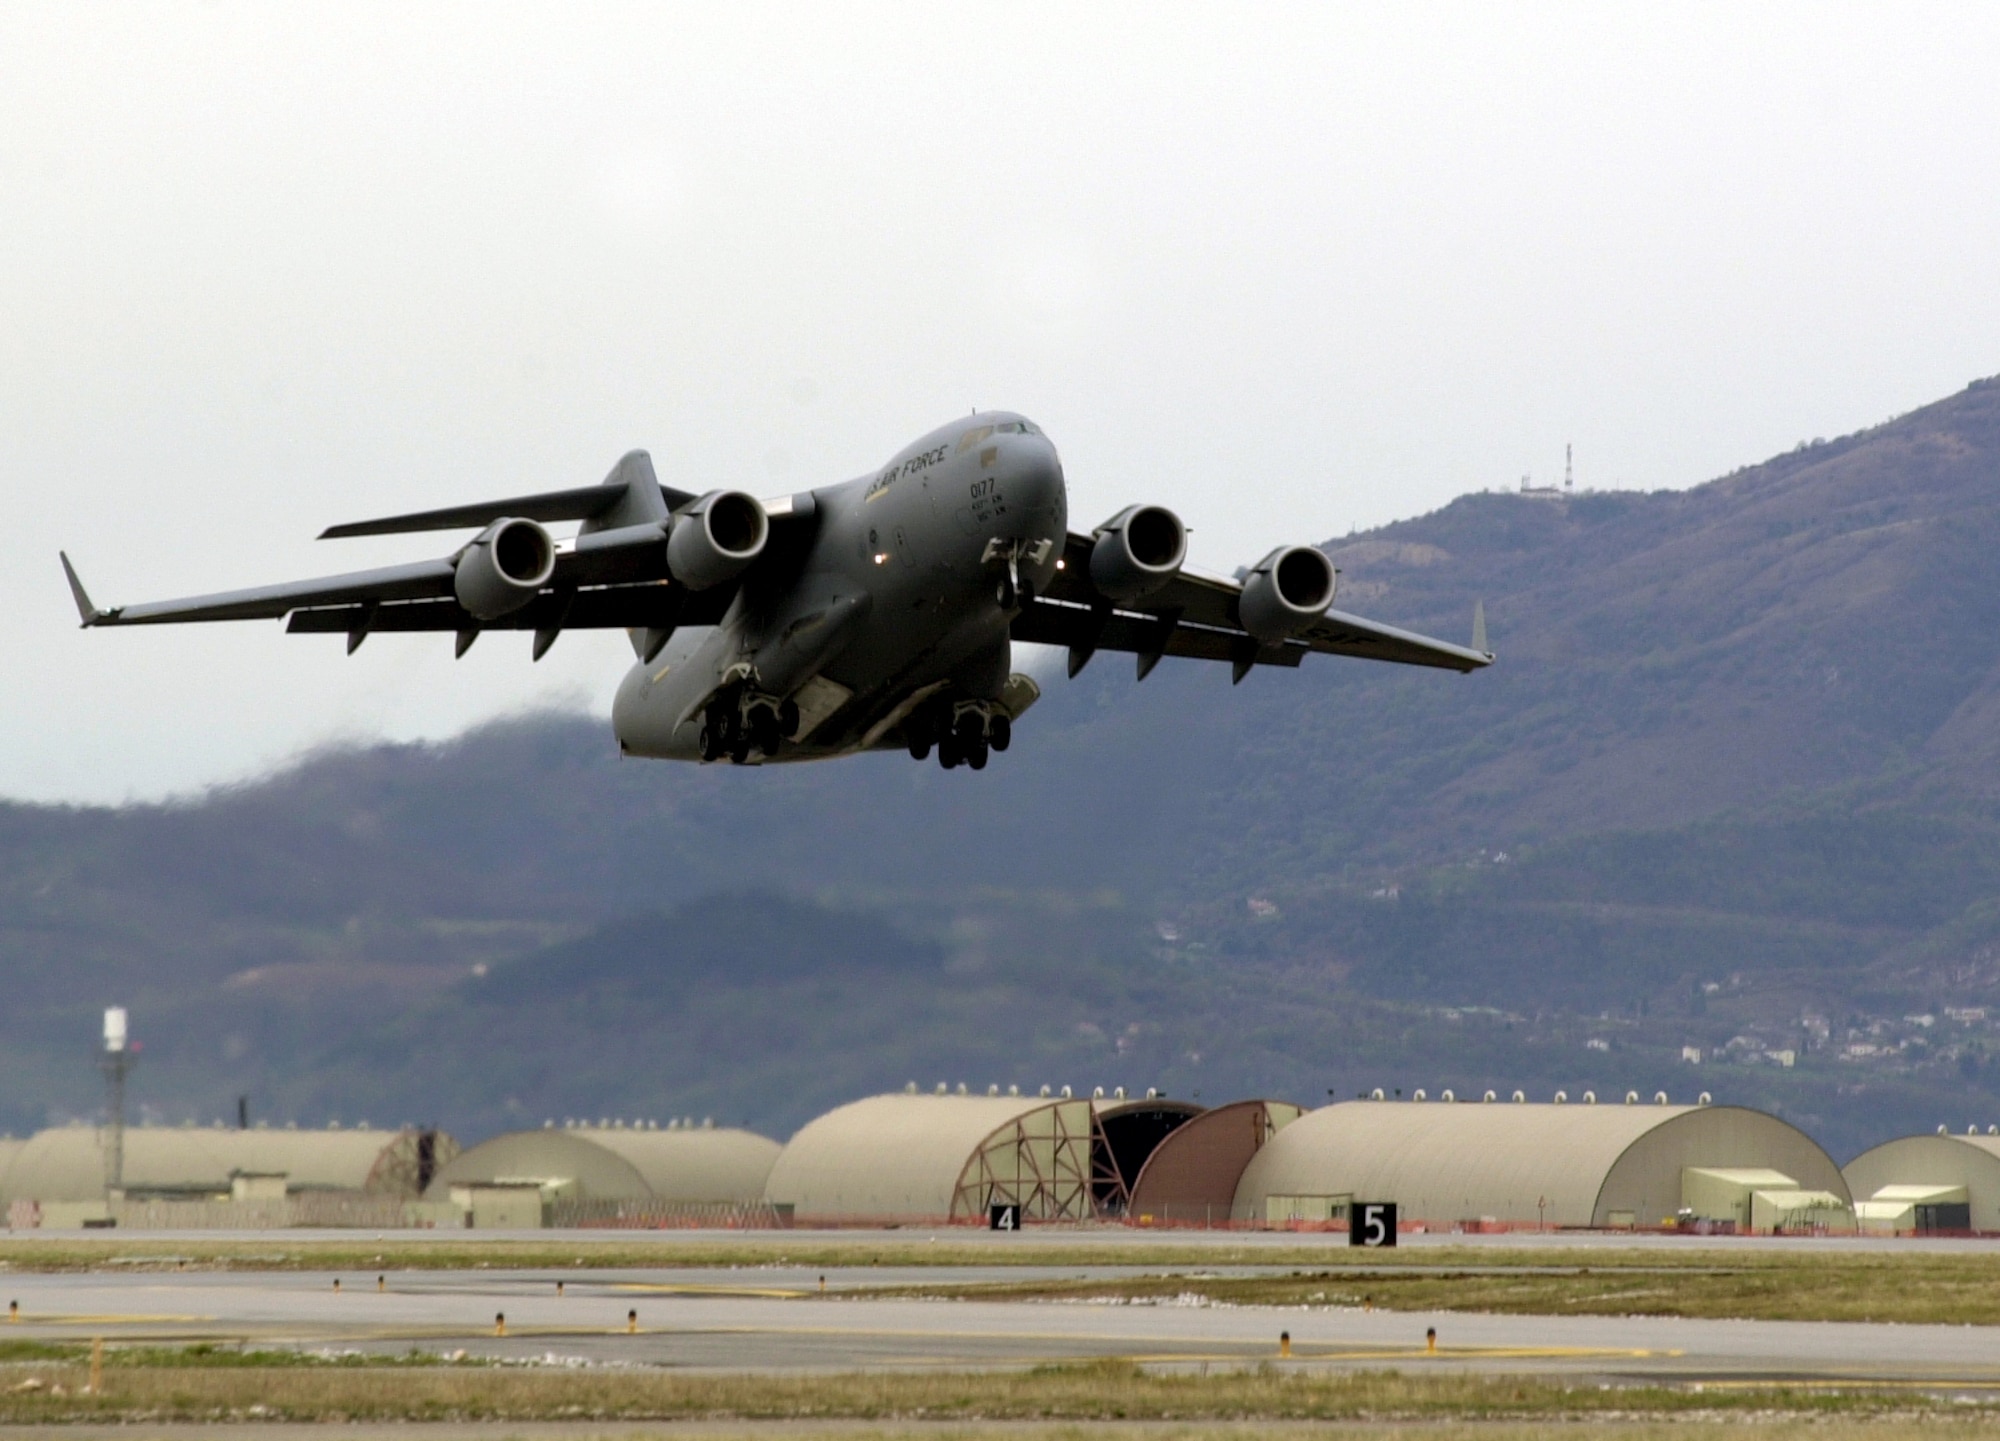 AVIANO AIR BASE, Italy  --  A C-17 Globemaster III takes off from here bound for McChord Air Force Base, Wash., after transiting through Italy.  (U.S. Air Force photo by Staff Sgt. Mitch Fuqua)